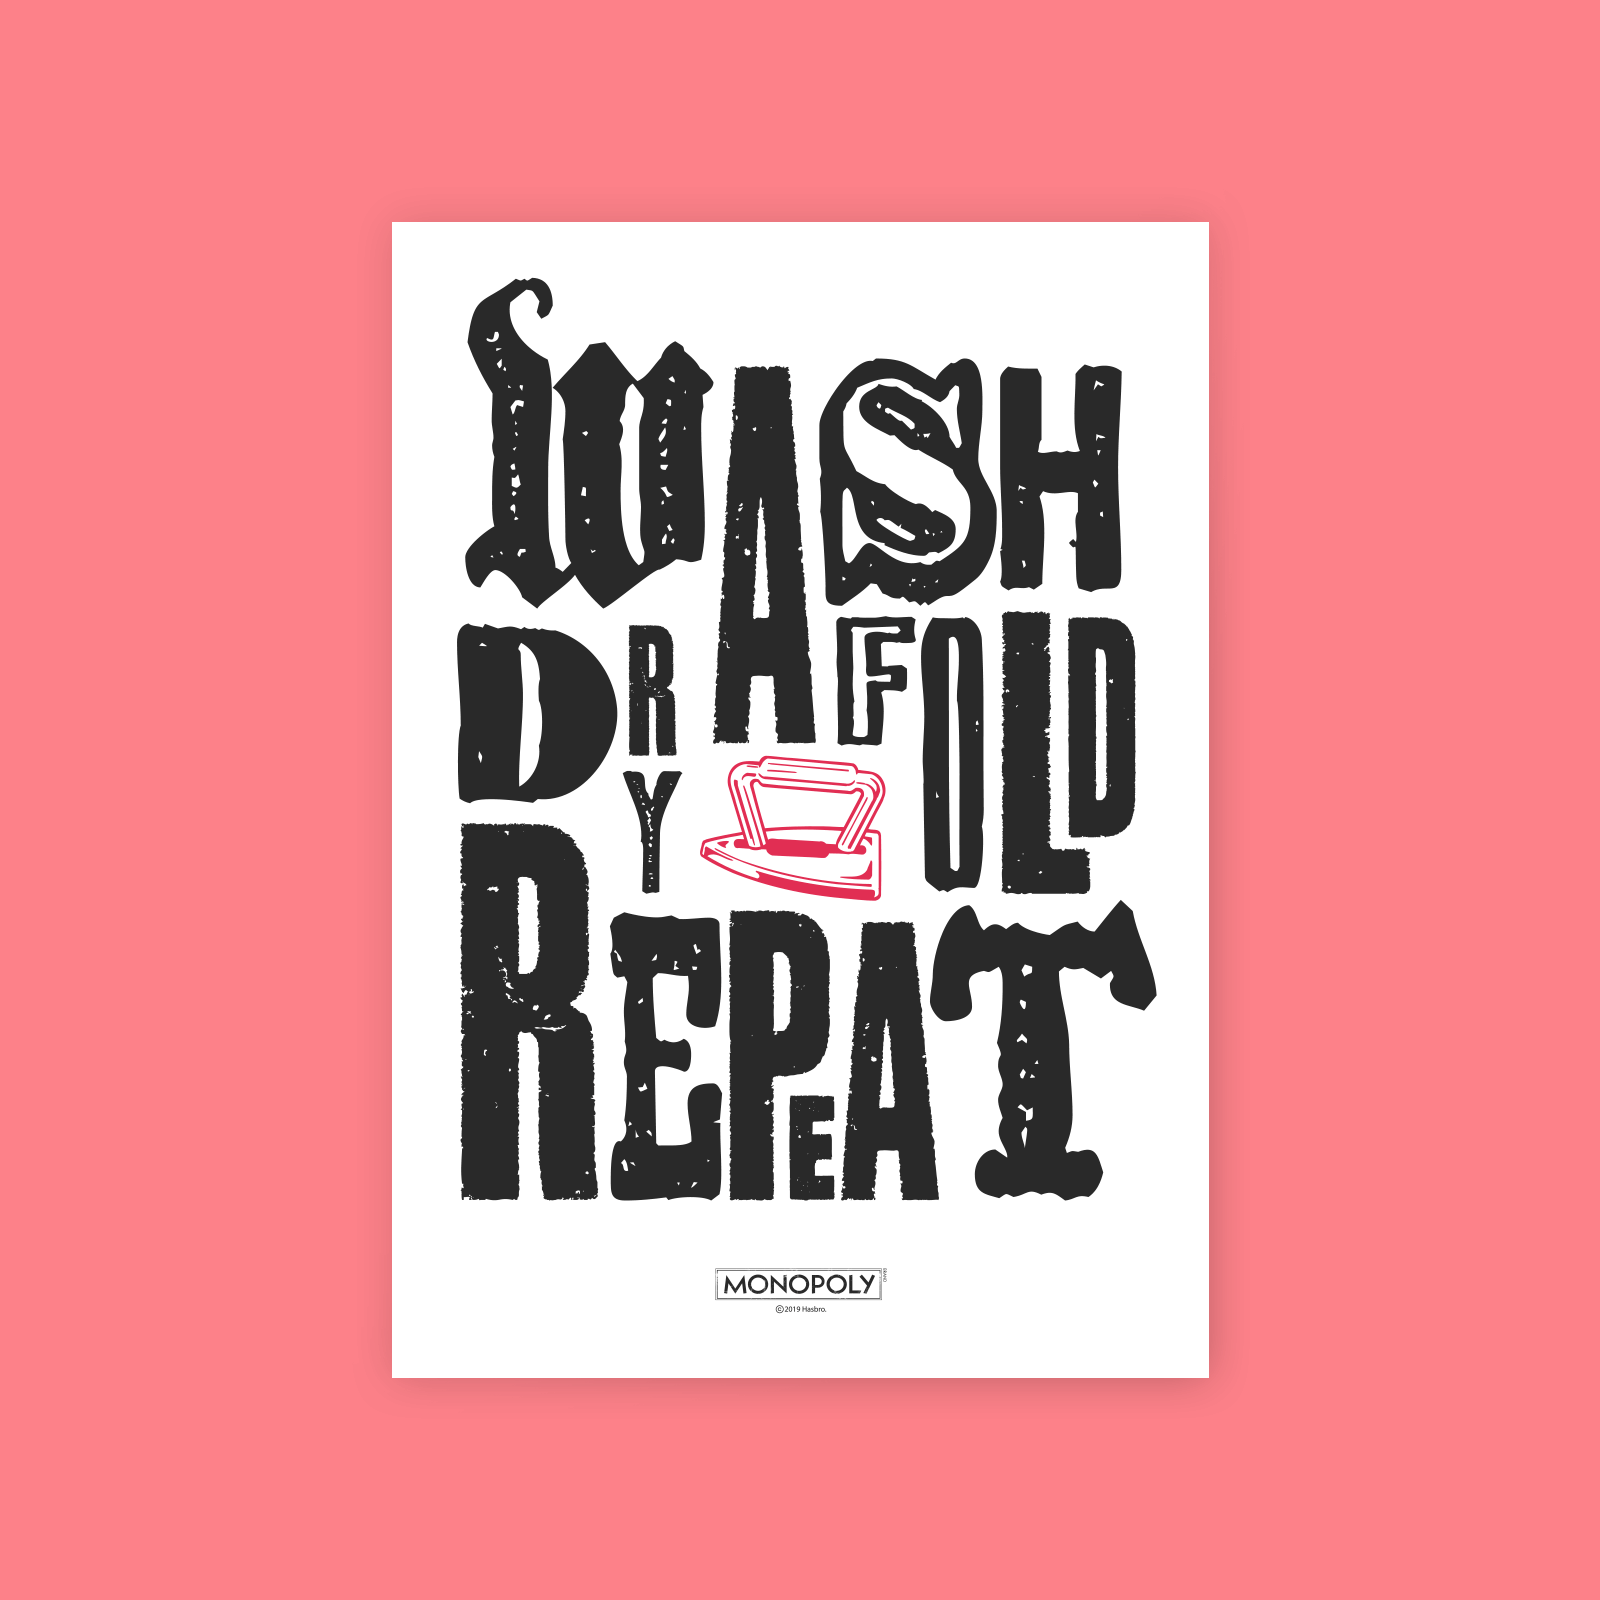 Monopoly Wash Dry Fold Repeat Art Print - A4